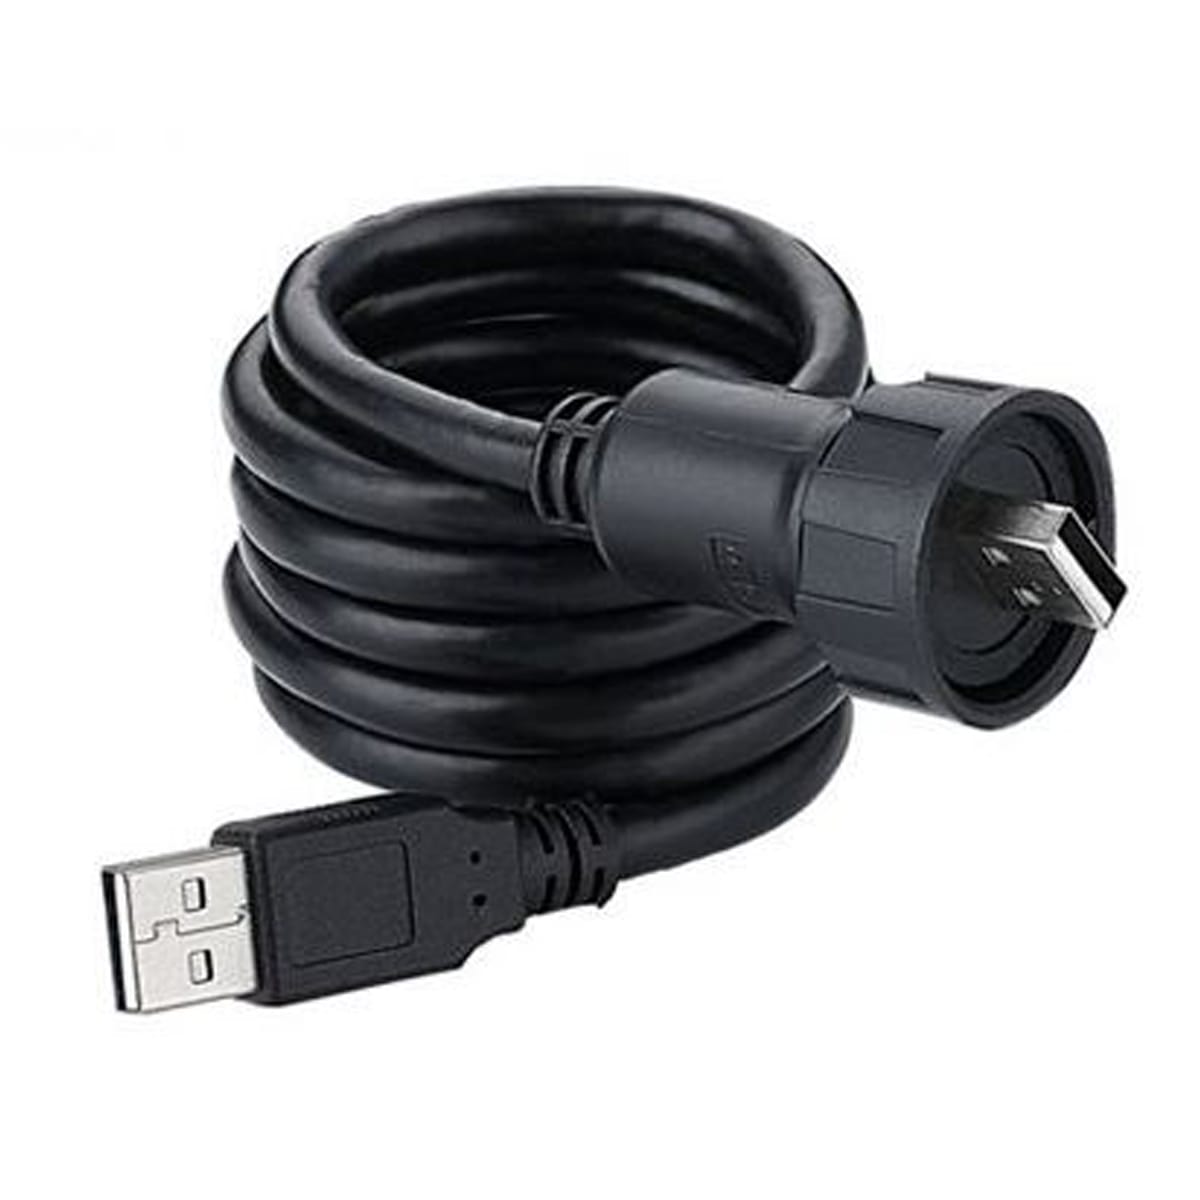 CNLINKO YU-USB 2.0 Industrial USB cable ENOVA Solutions AG Connectors   Cables English